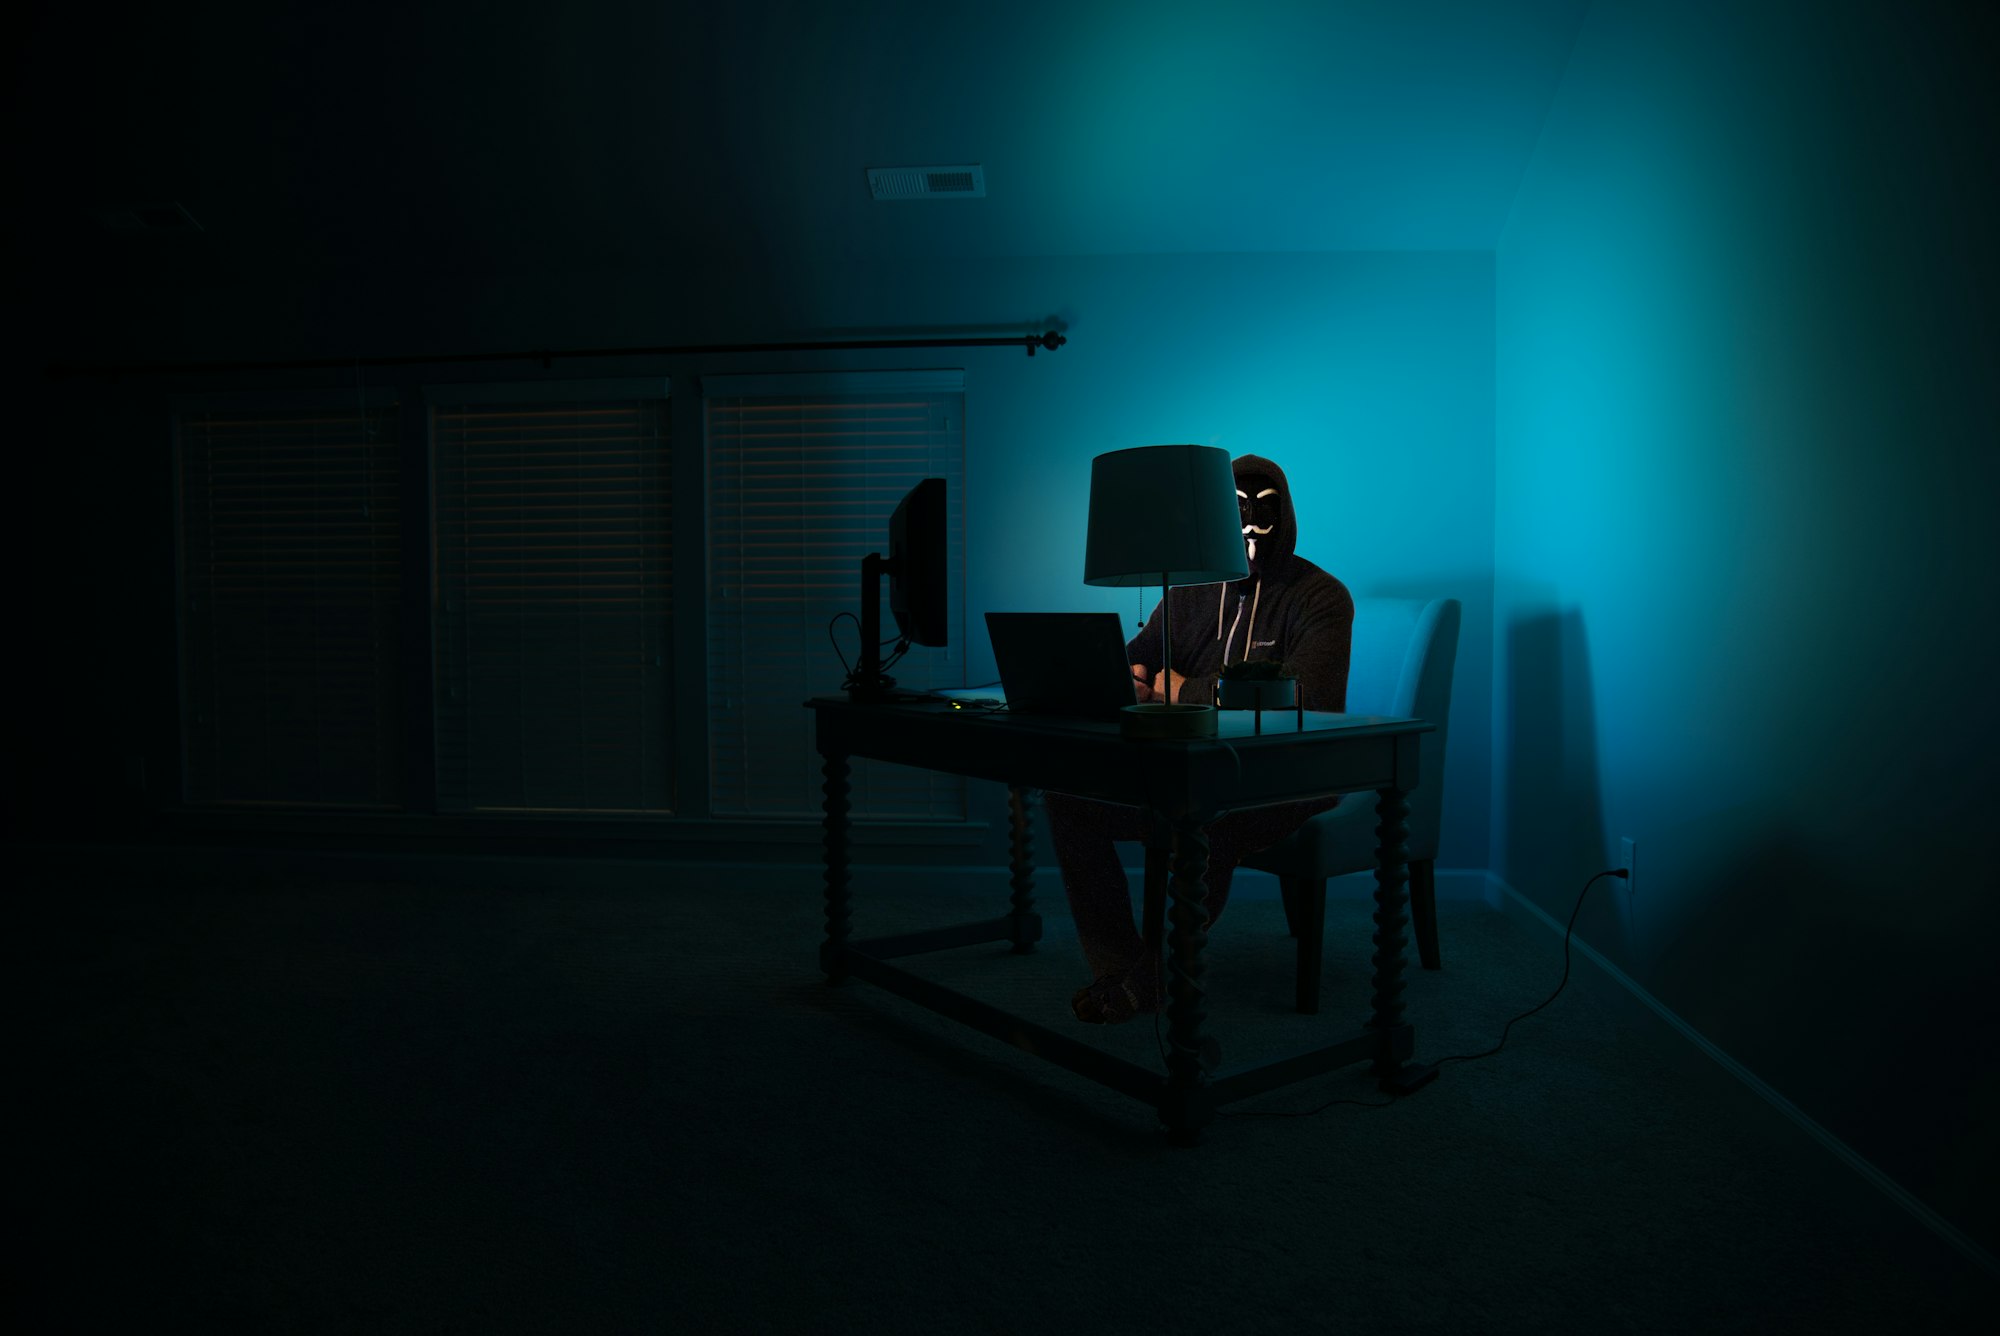 Pictured - a man at a computer disguised as an anonymous hacker wearing a Guy Fawkes mask.